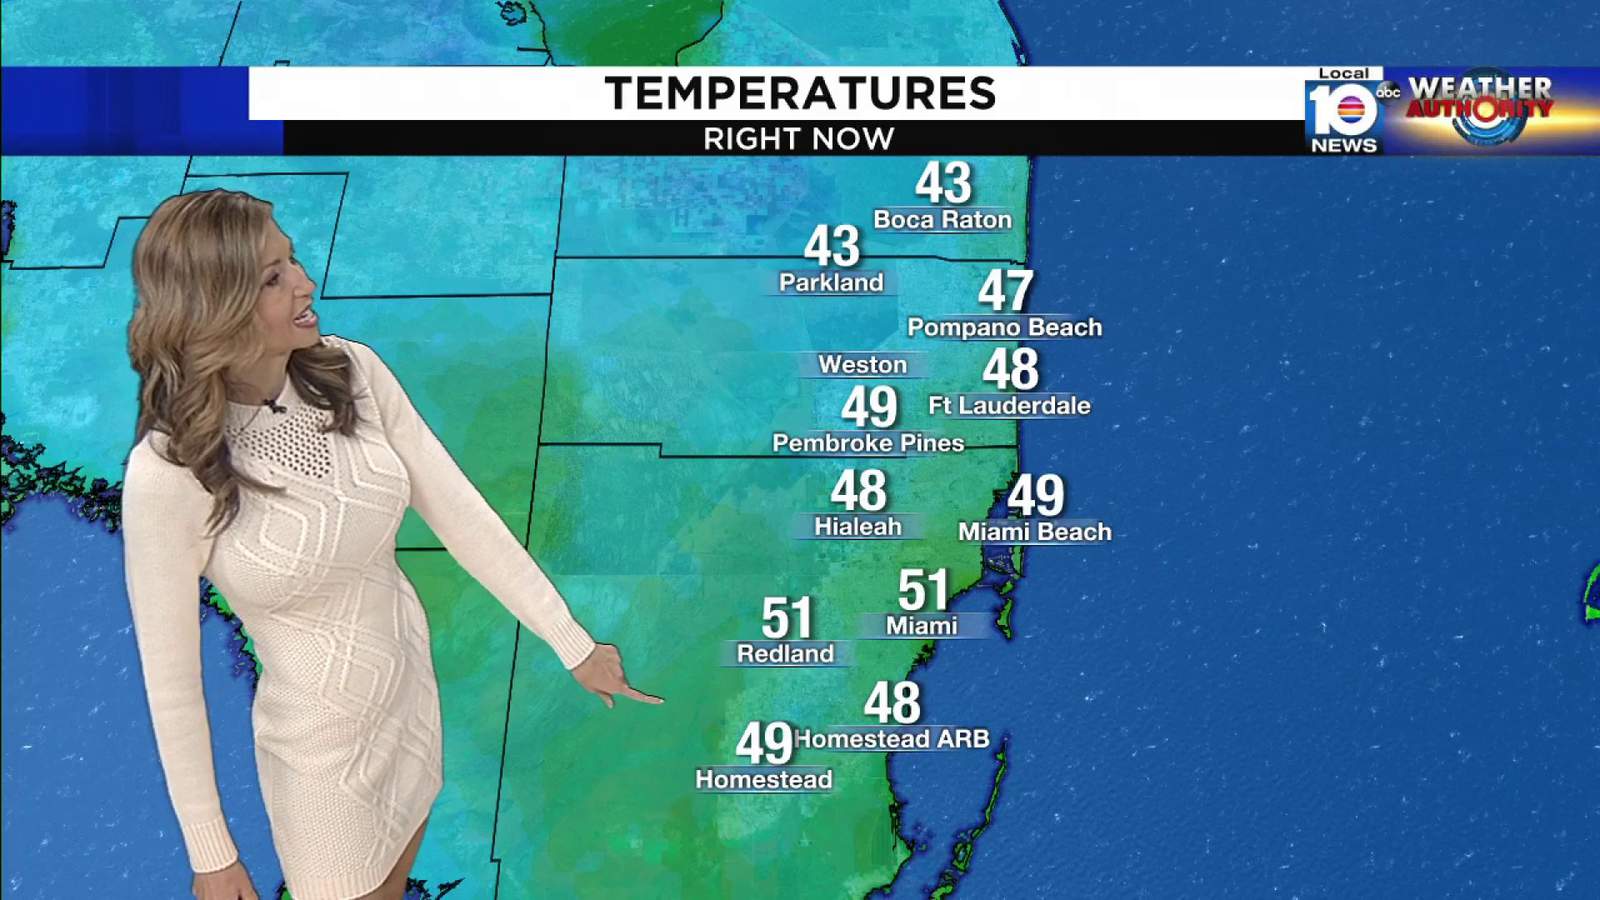 South Florida’s chilly weather expected to get even colder